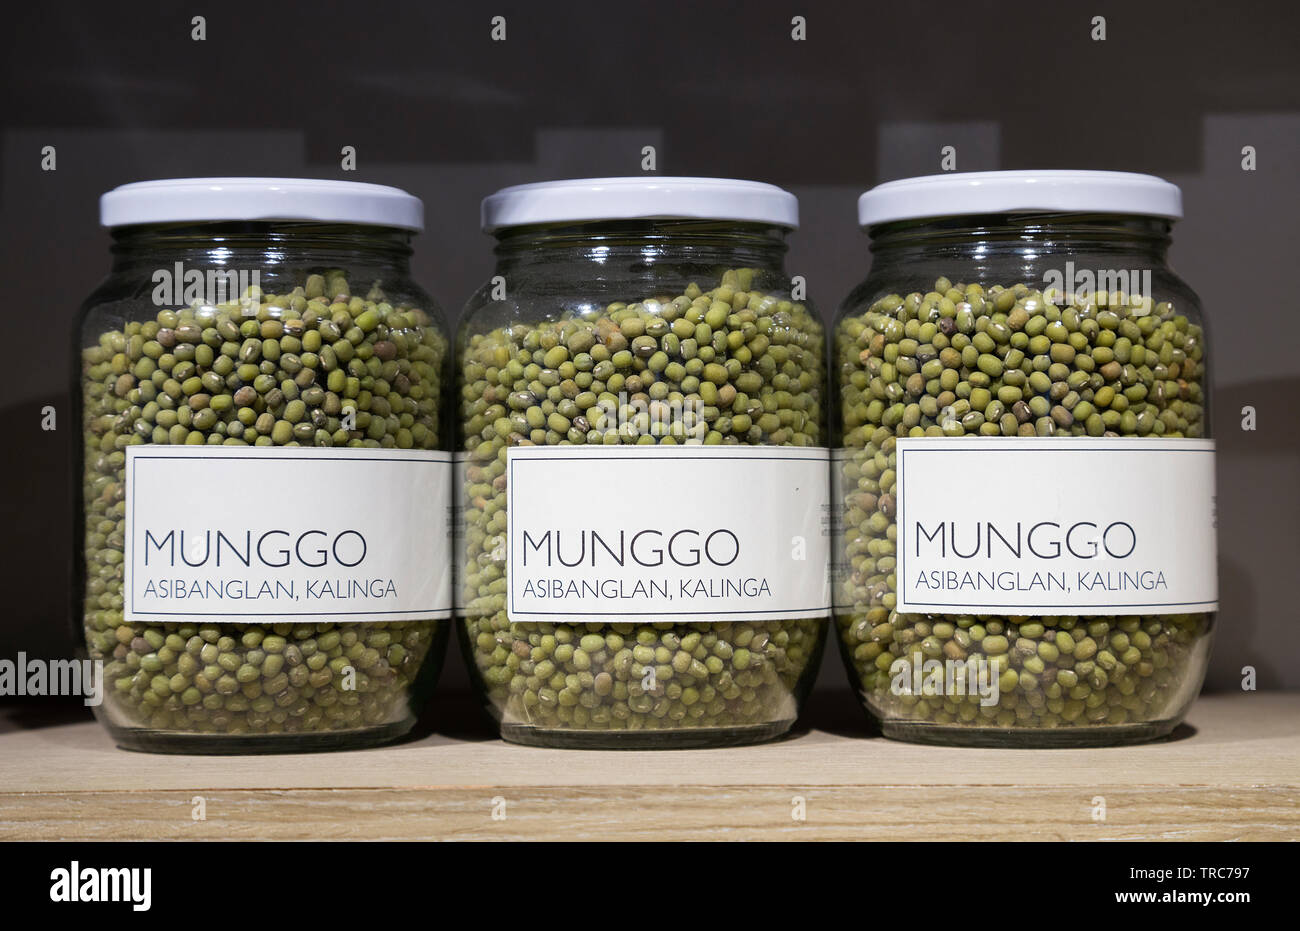 Manila, Philippines - August, 4, 2016: Glass jars with green mung beans (munggo) on dispaly in a store Stock Photo